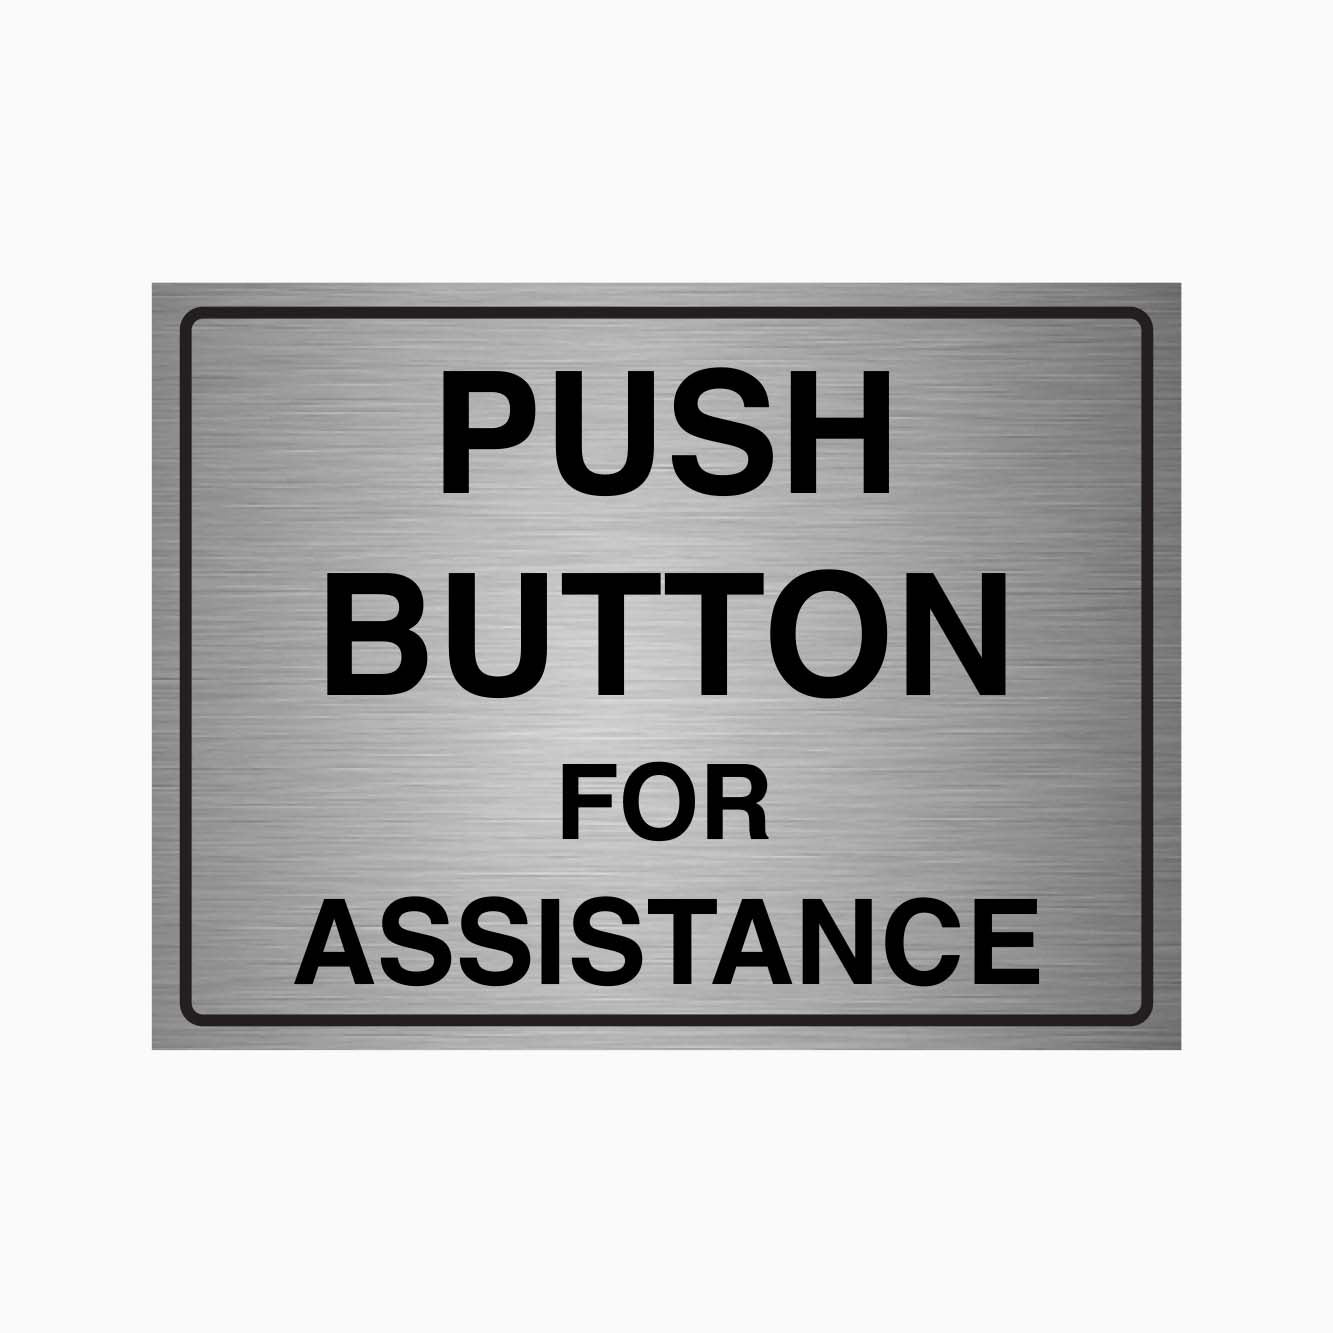 PUSH BUTTON FOR ASSISTANCE SIGN - GET SIGNS